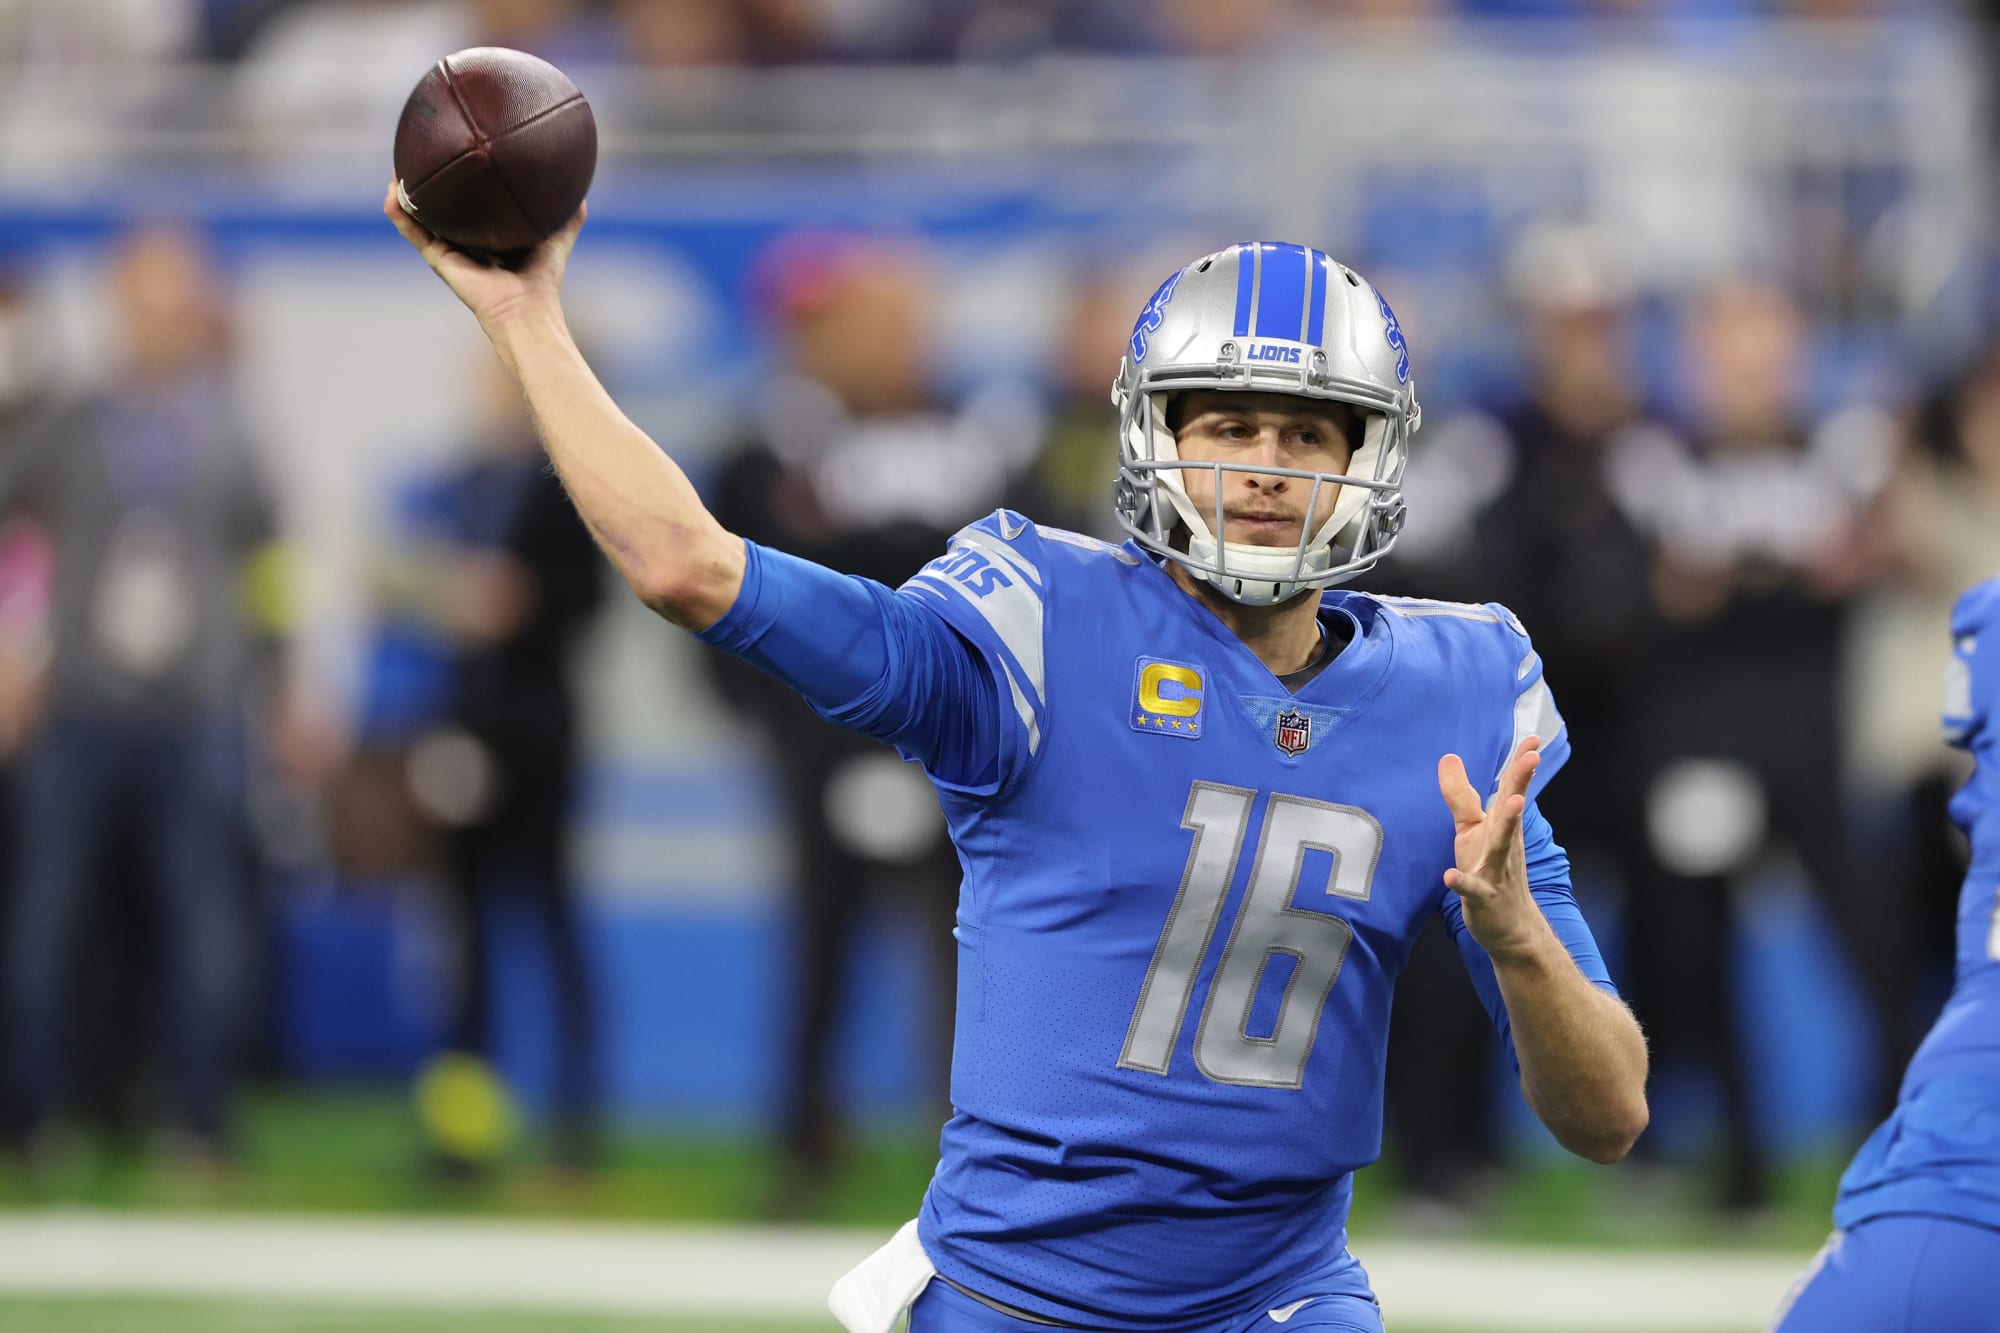 Lions quarterback Jared Goff belongs on fantasy benches in Week 15 vs. the Jets